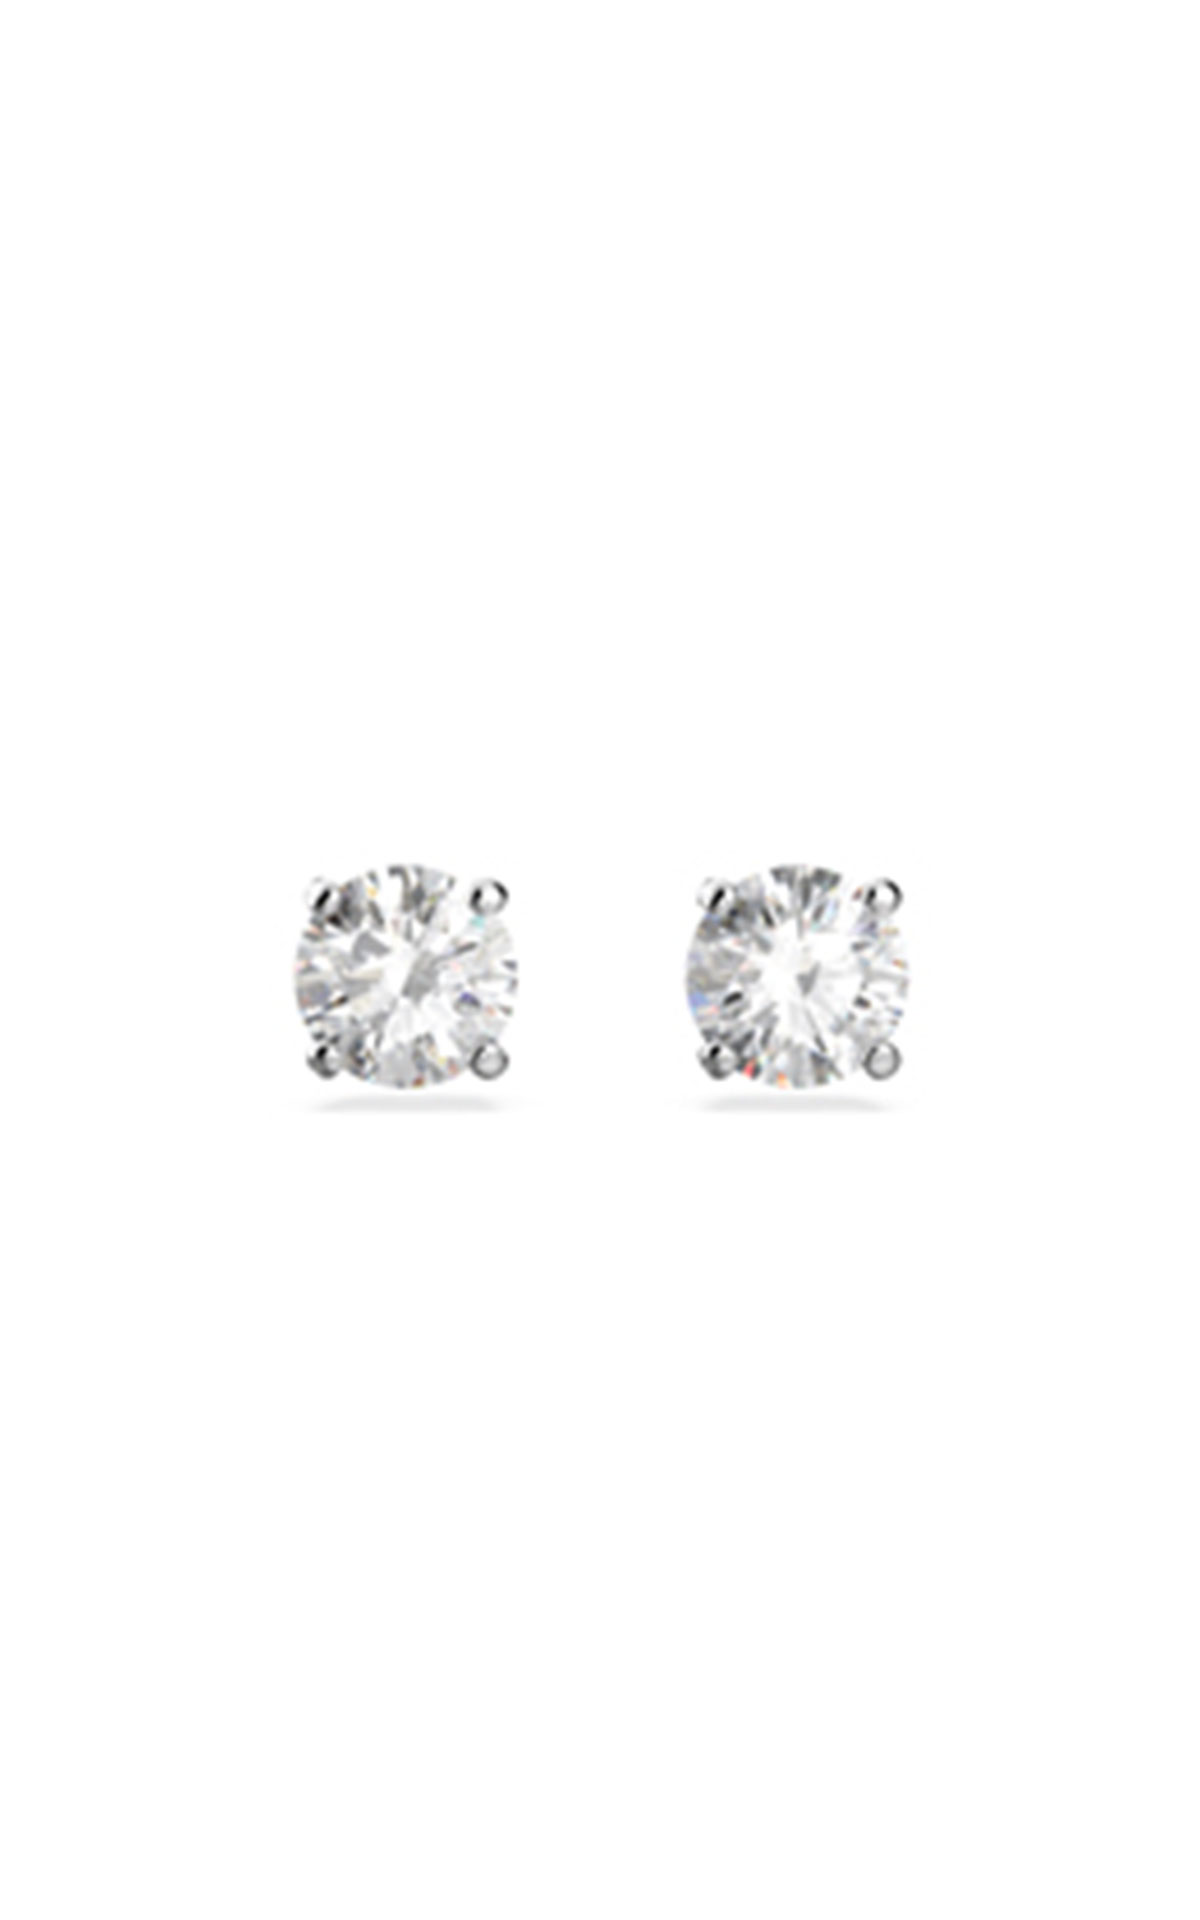 Swarovski Attract stud earrings from Bicester Village